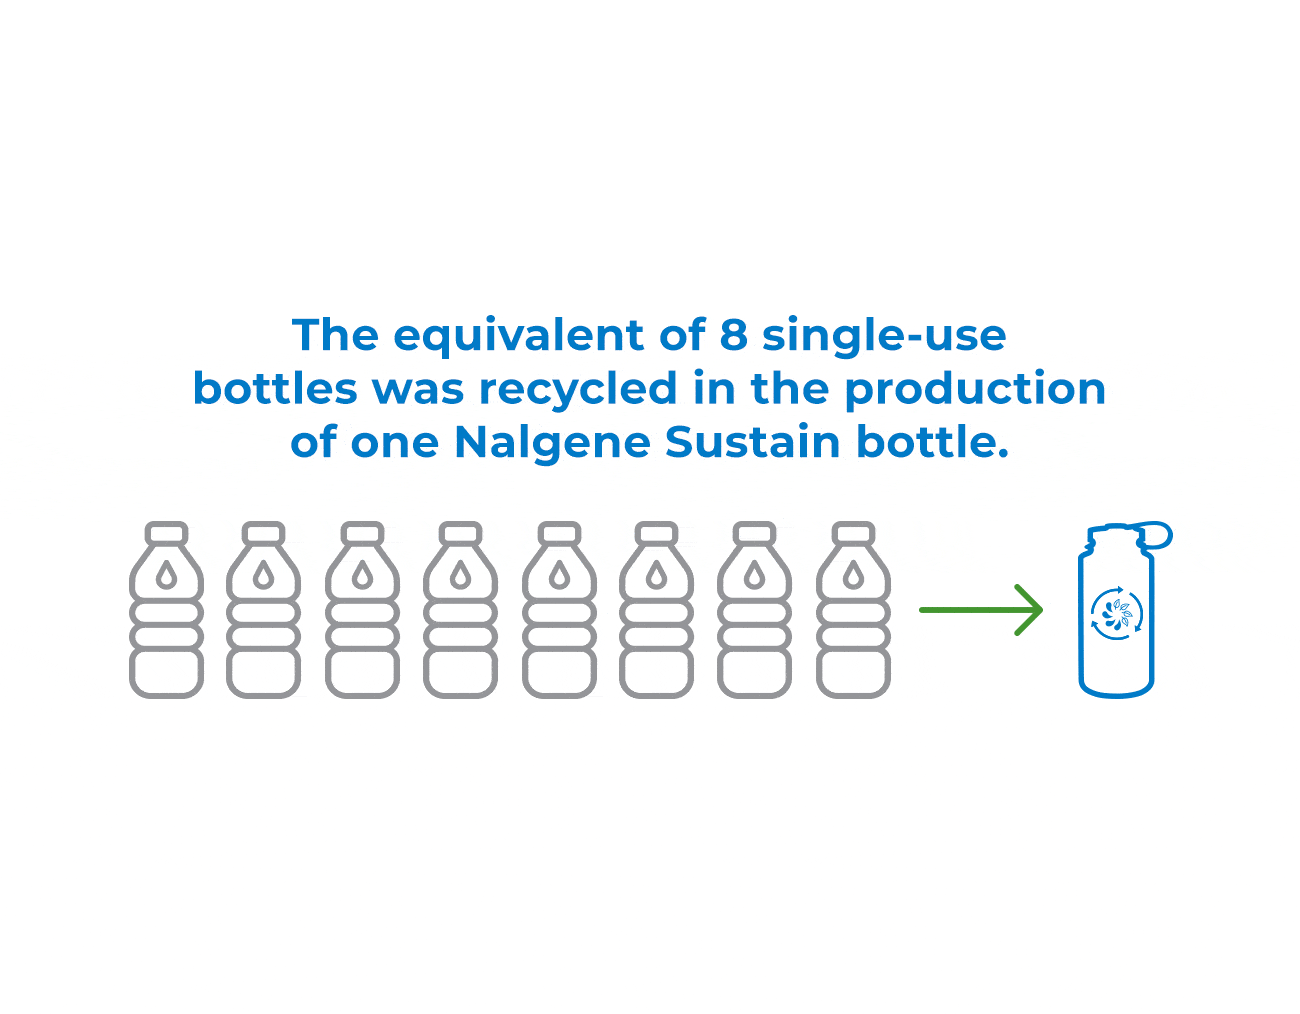 Eight single use bottles were recycled in the production of one Nalgene Sustain bottle